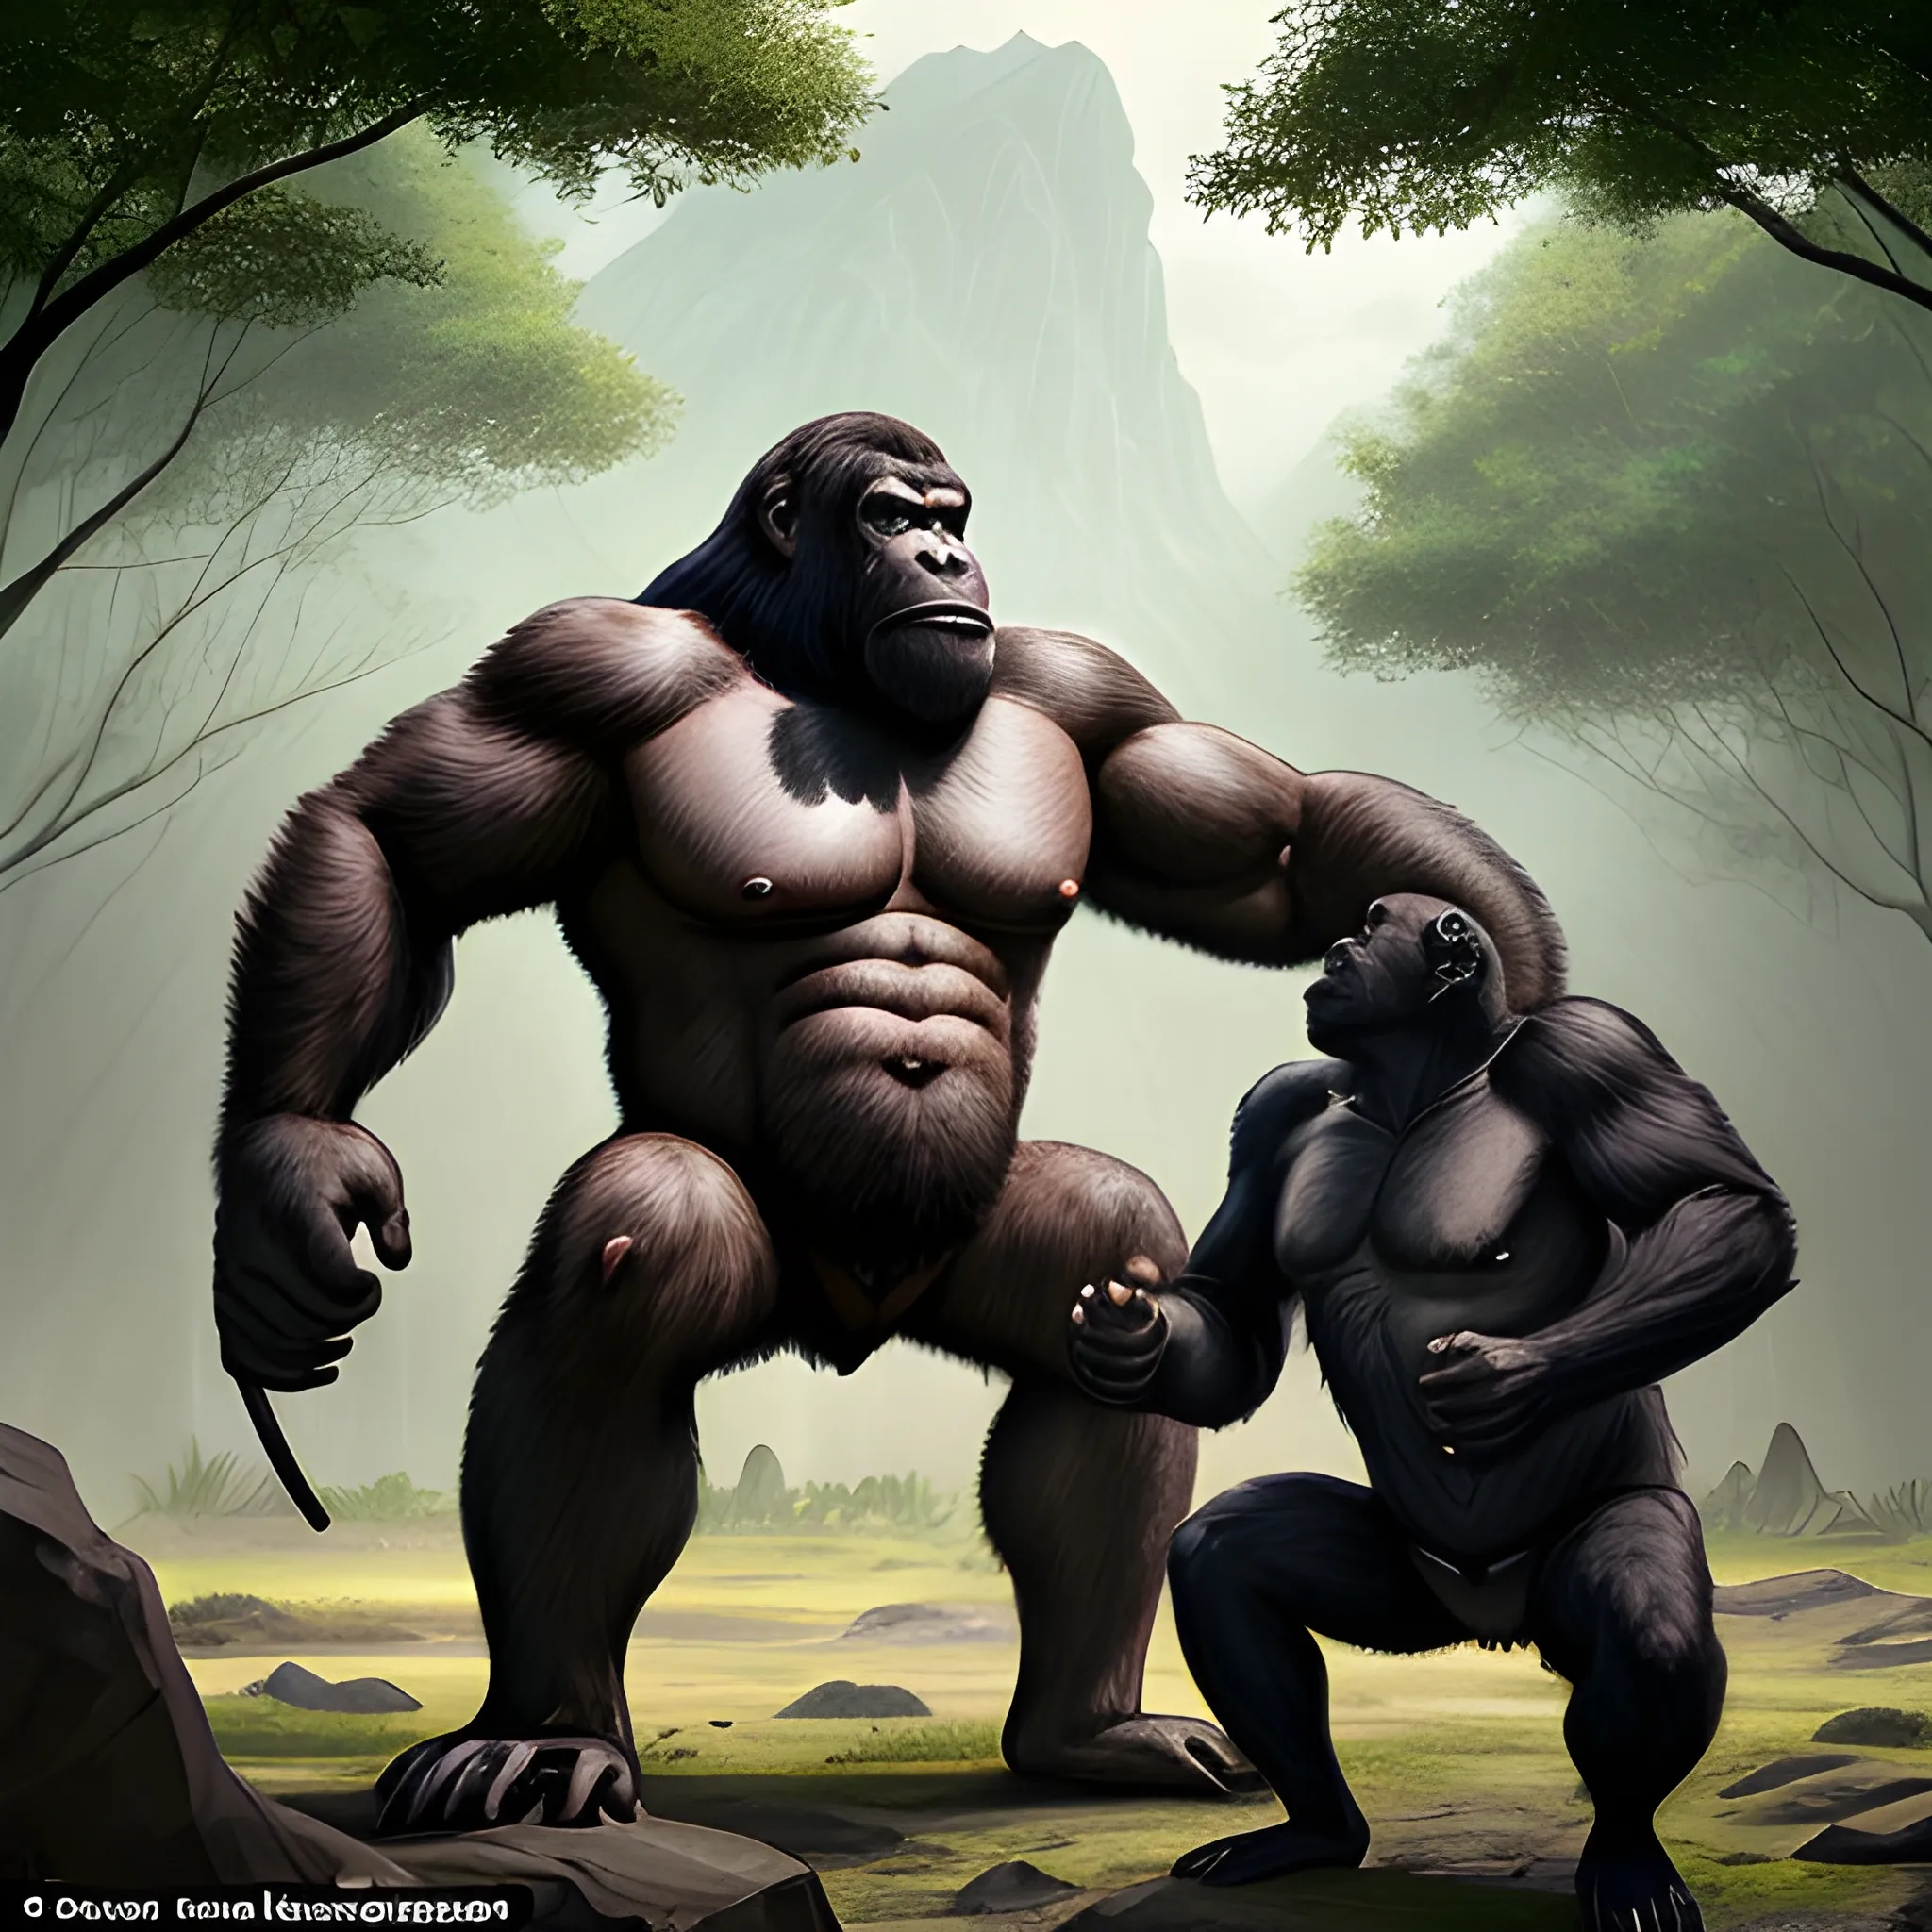 Appearance: The Strong-Looking Ape is a large and imposing primate, exuding raw strength and power in its every movement. It has a robust and muscular body covered in coarse, dark fur, which can range from black to deep brown or reddish hues. Its shoulders are broad and powerful, and its arms are long and muscular, capable of delivering devastating blows. The Strong-Looking Ape's face is expressive, with intelligent eyes that convey both curiosity and a hint of primal ferocity.

Features: The Strong-Looking Ape is a formidable creature, possessing incredible physical strength and agility. Its powerful arms allow it to swing through trees with ease, making it a skilled climber and acrobat. In addition to its raw physical power, the Strong-Looking Ape's thick fur offers protection against environmental elements and minor injuries.

Habitat: Strong-Looking Apes are typically found in dense jungles, vast forests, and remote mountainous regions. They are highly adaptable creatures, capable of surviving in a variety of environments. In your DND world, they might inhabit hidden valleys or ancient ruins, guarding sacred territories or serving as protectors of natural wonders.

Behavior: While the Strong-Looking Ape is an intelligent creature, it primarily relies on its physical prowess to navigate its surroundings and interact with others. It lives in social groups or troops, exhibiting complex communication through vocalizations, body language, and gestures. While generally non-aggressive toward other creatures, the Strong-Looking Ape fiercely defends its territory and family from perceived threats.

Role in the World: In your DND world, Strong-Looking Apes could be seen as noble creatures embodying the untamed spirit of nature. Druids and rangers might have a special connection with these primates, viewing them as symbols of strength, adaptability, and primal wisdom.

Encountering a Strong-Looking Ape in the wild can be a captivating and potentially dangerous experience for adventurers. Players may witness the ape's impressive physical abilities as it swings effortlessly through the trees or engages in playful displays with other members of its troop. While generally non-aggressive, provoking or threatening a Strong-Looking Ape or its family could lead to a fierce defense, forcing players to use diplomacy or demonstrate respect for the creatures' territory.

The presence of Strong-Looking Apes in your campaign adds an element of mystery and awe to the wilderness. Players might encounter these intelligent and powerful creatures during their explorations, offering opportunities for unique and memorable interactions. Strong-Looking Apes can serve as guardians of ancient sites, allies to druids seeking to protect the natural world, or even opponents in thrilling feats of strength and agility. Their presence in your DND world contributes to the rich tapestry of wildlife and brings a sense of wonder to the untamed corners of your campaign setting.